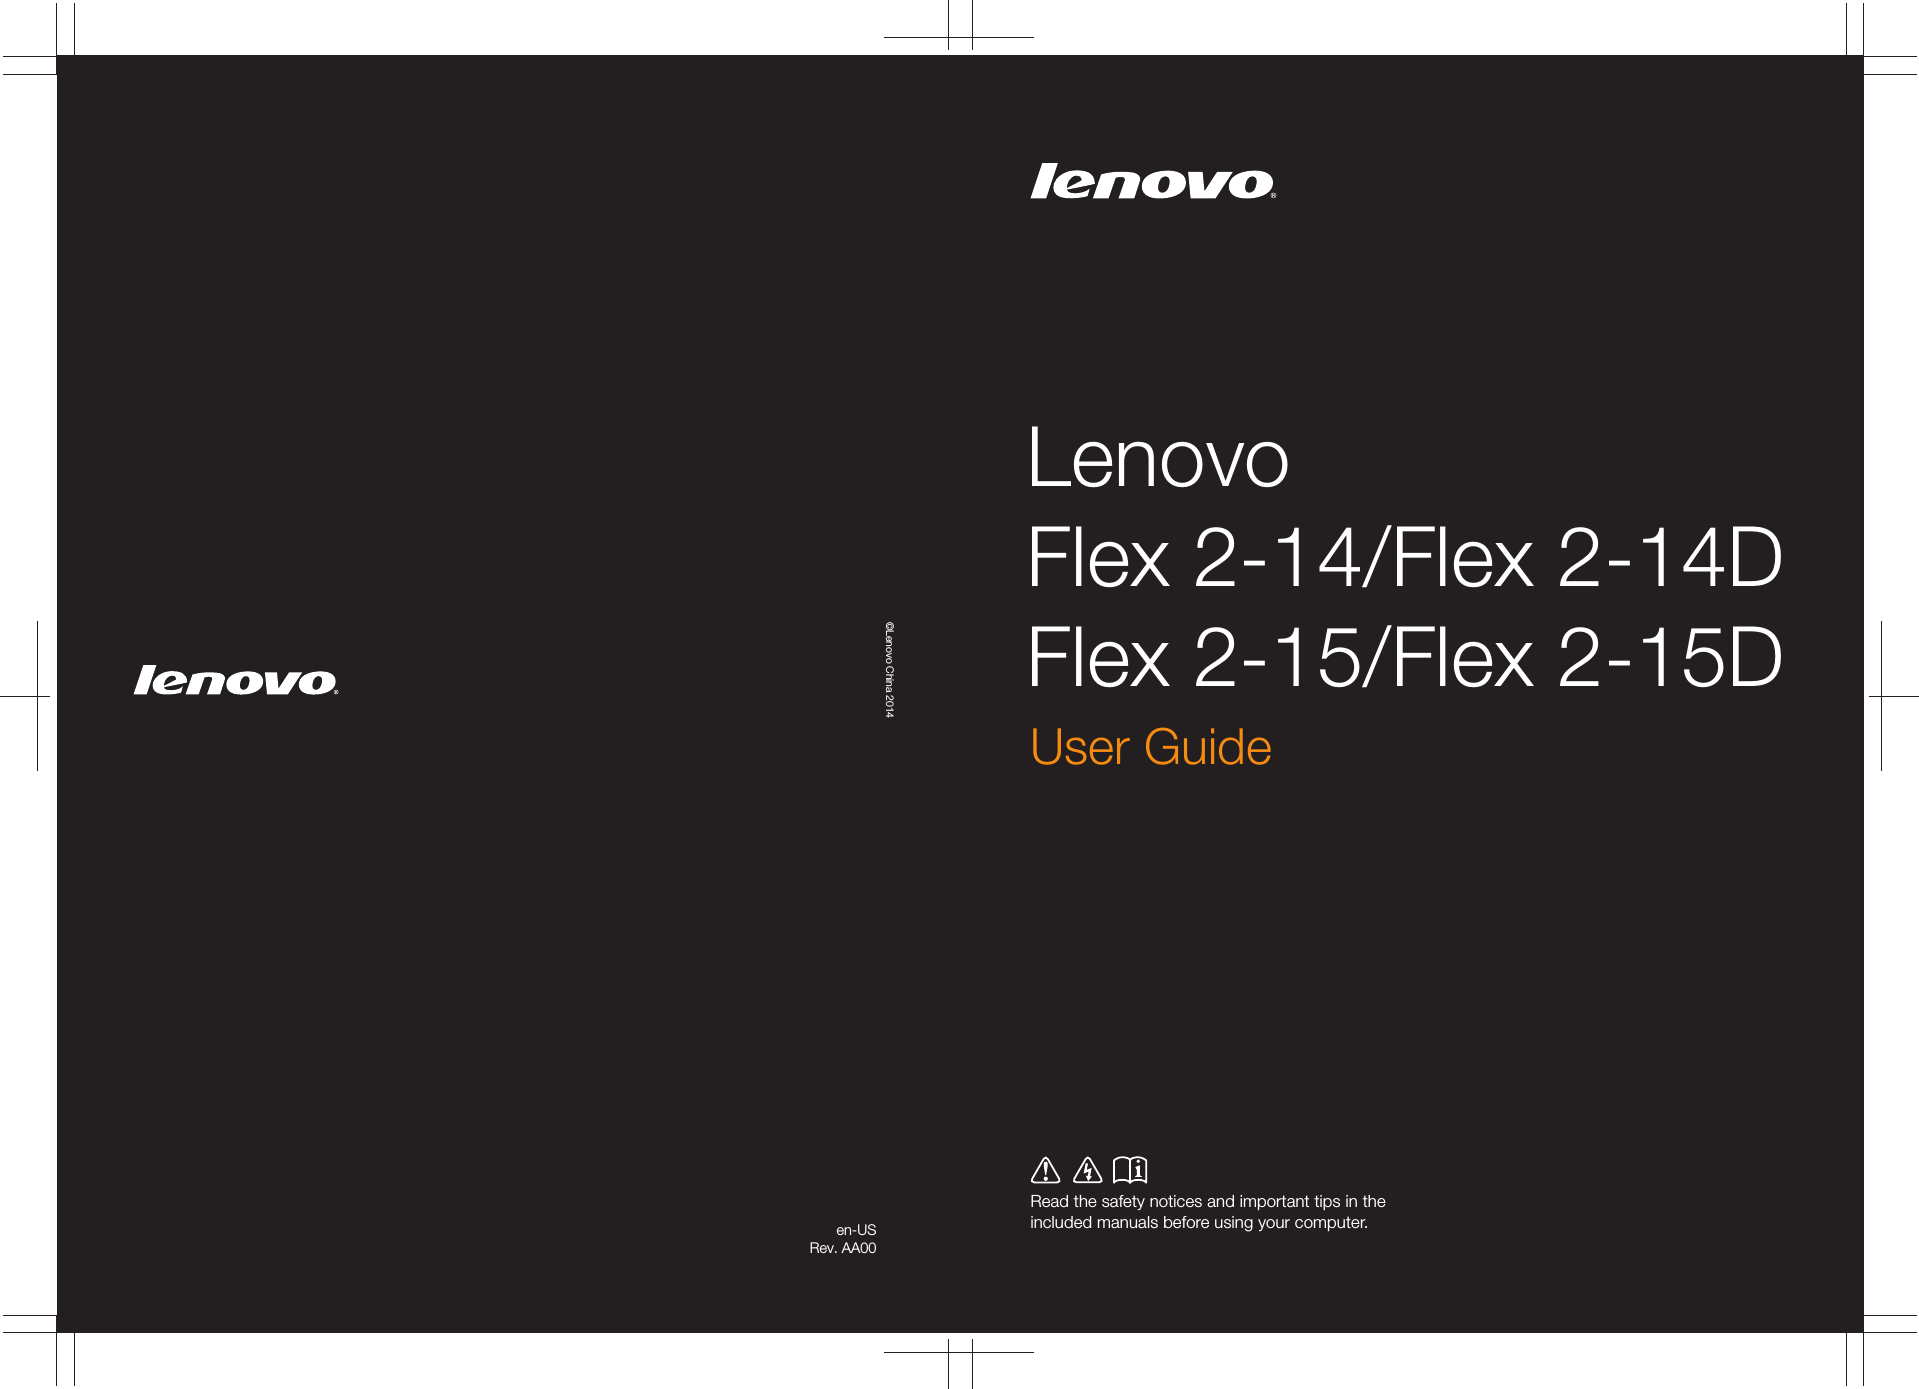 LenovoFlex 2-14/Flex 2-14DFlex 2-15/Flex 2-15DRead the safety notices and important tips in the included manuals before using your computer.en-USRev. AA00User Guide©Lenovo China 2014